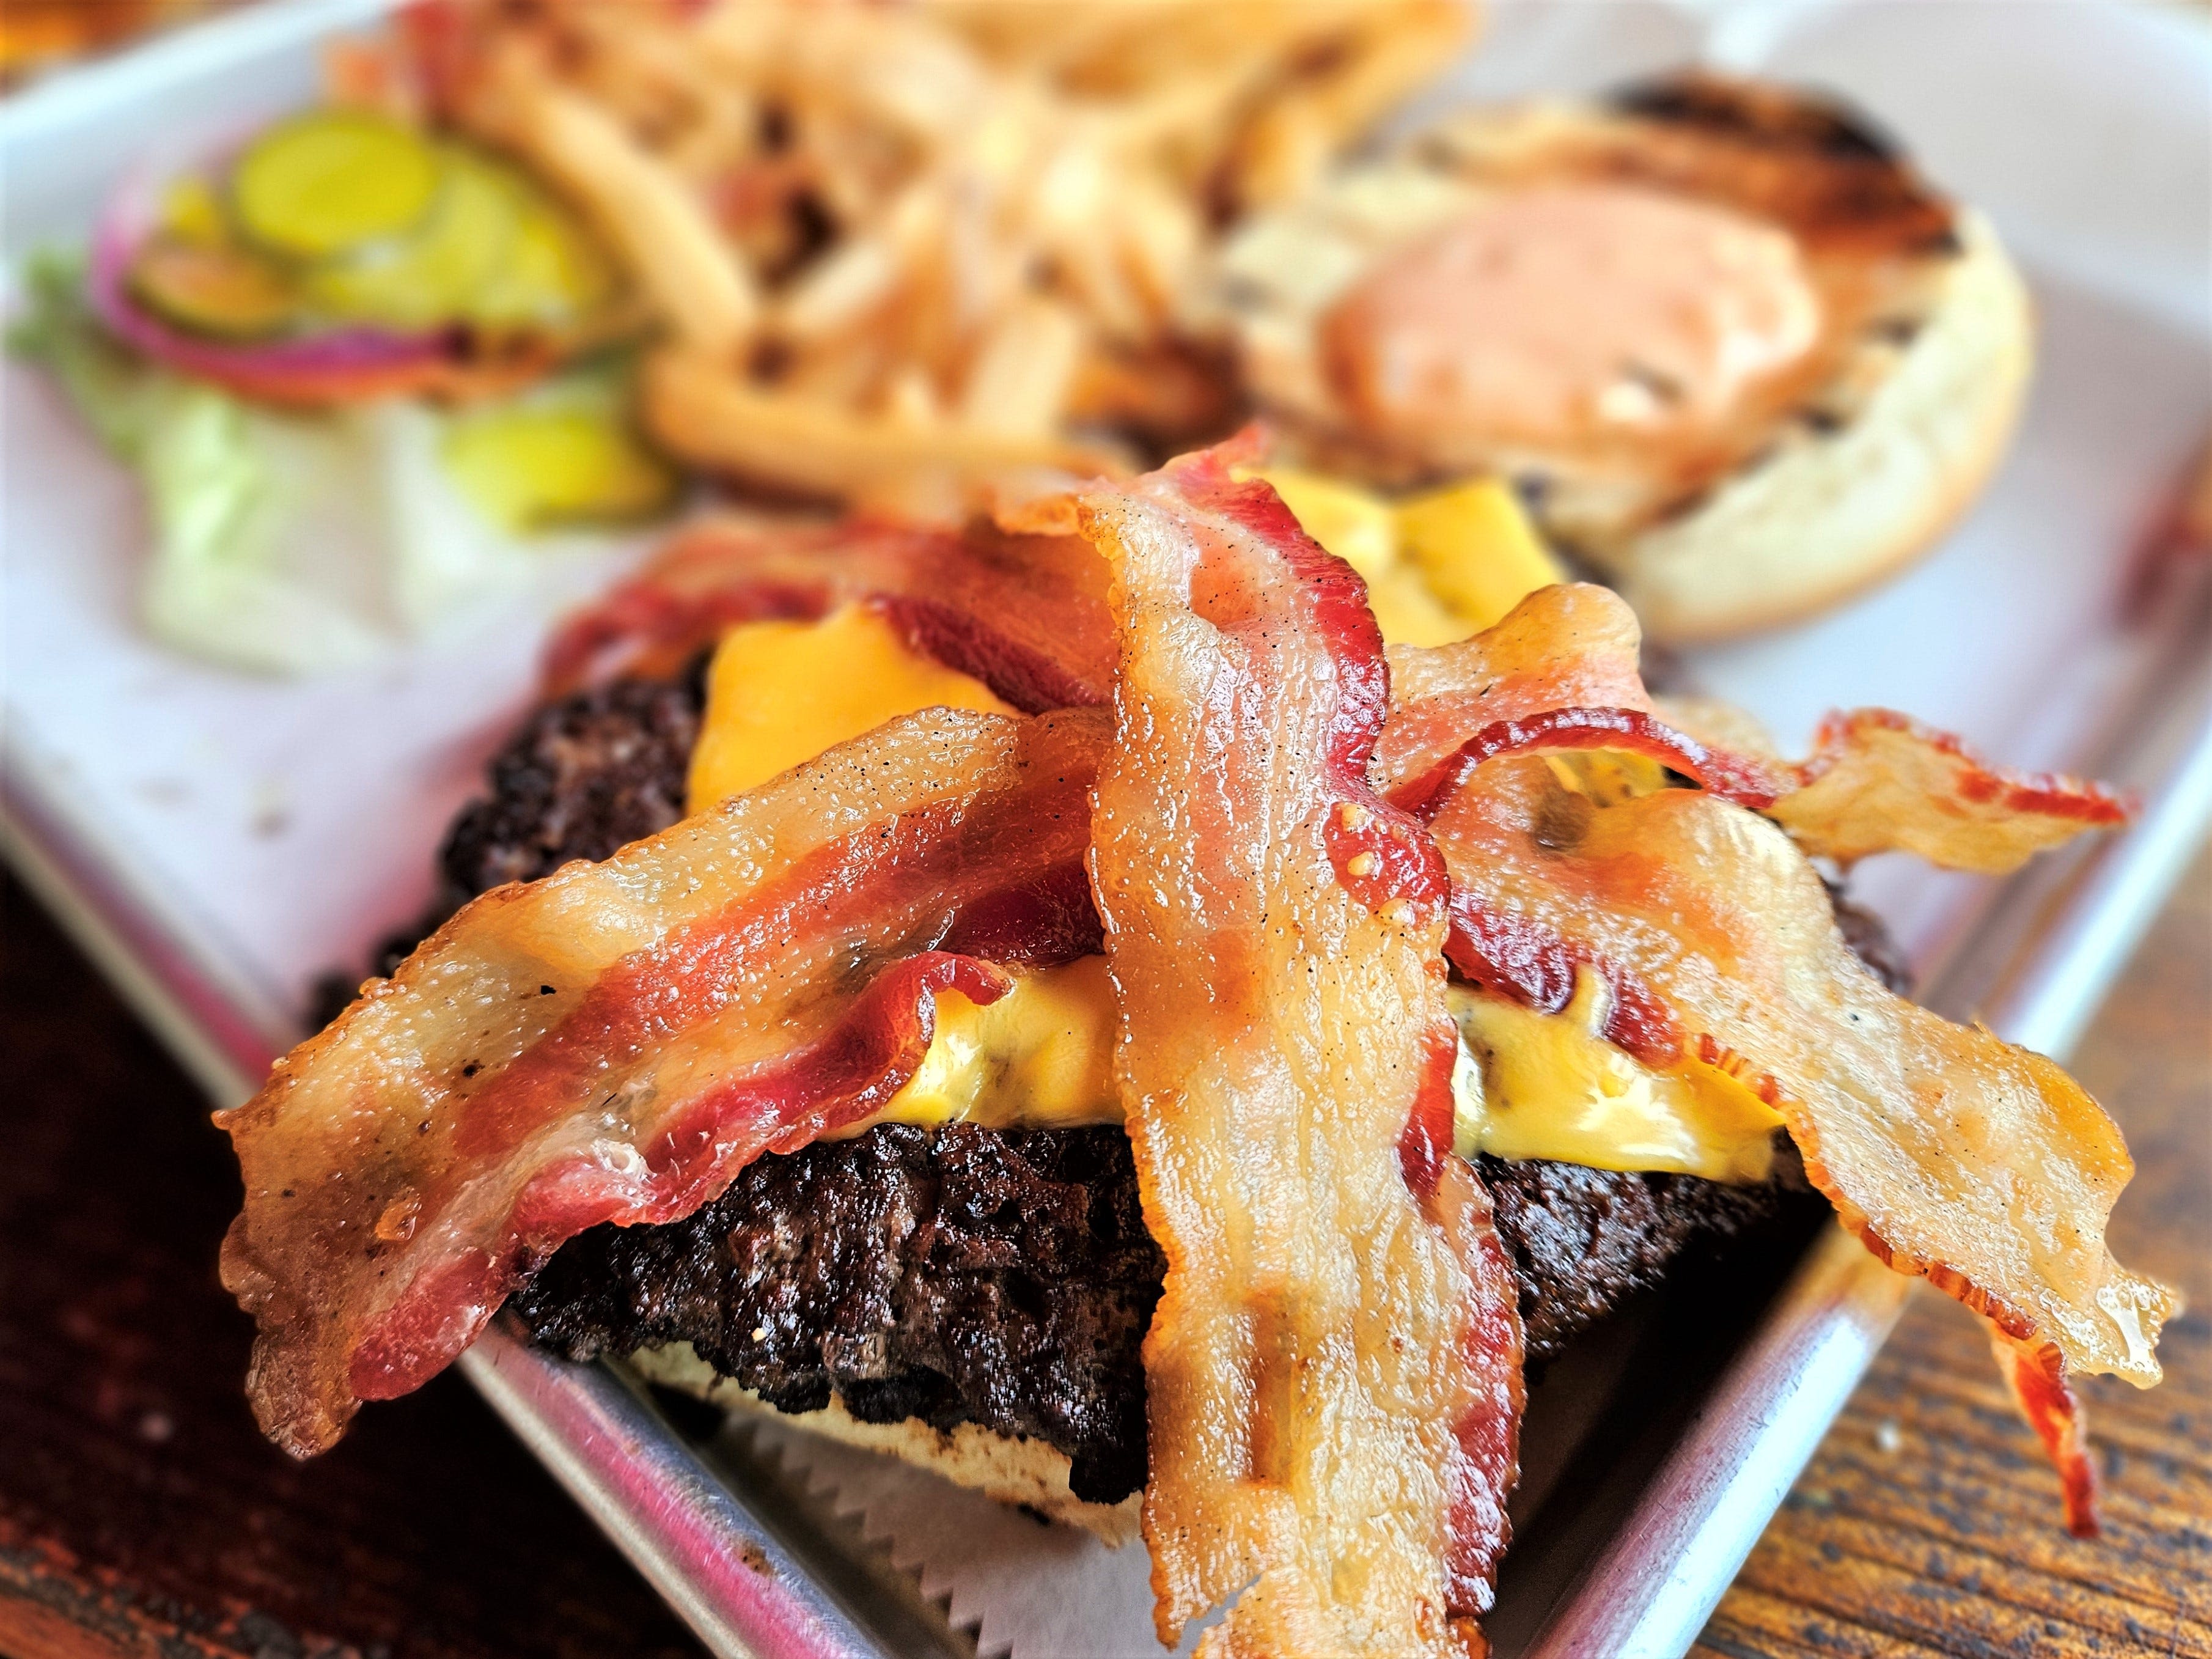 What’s the best burger restaurant in Florida? 15 favorites we love to recommend